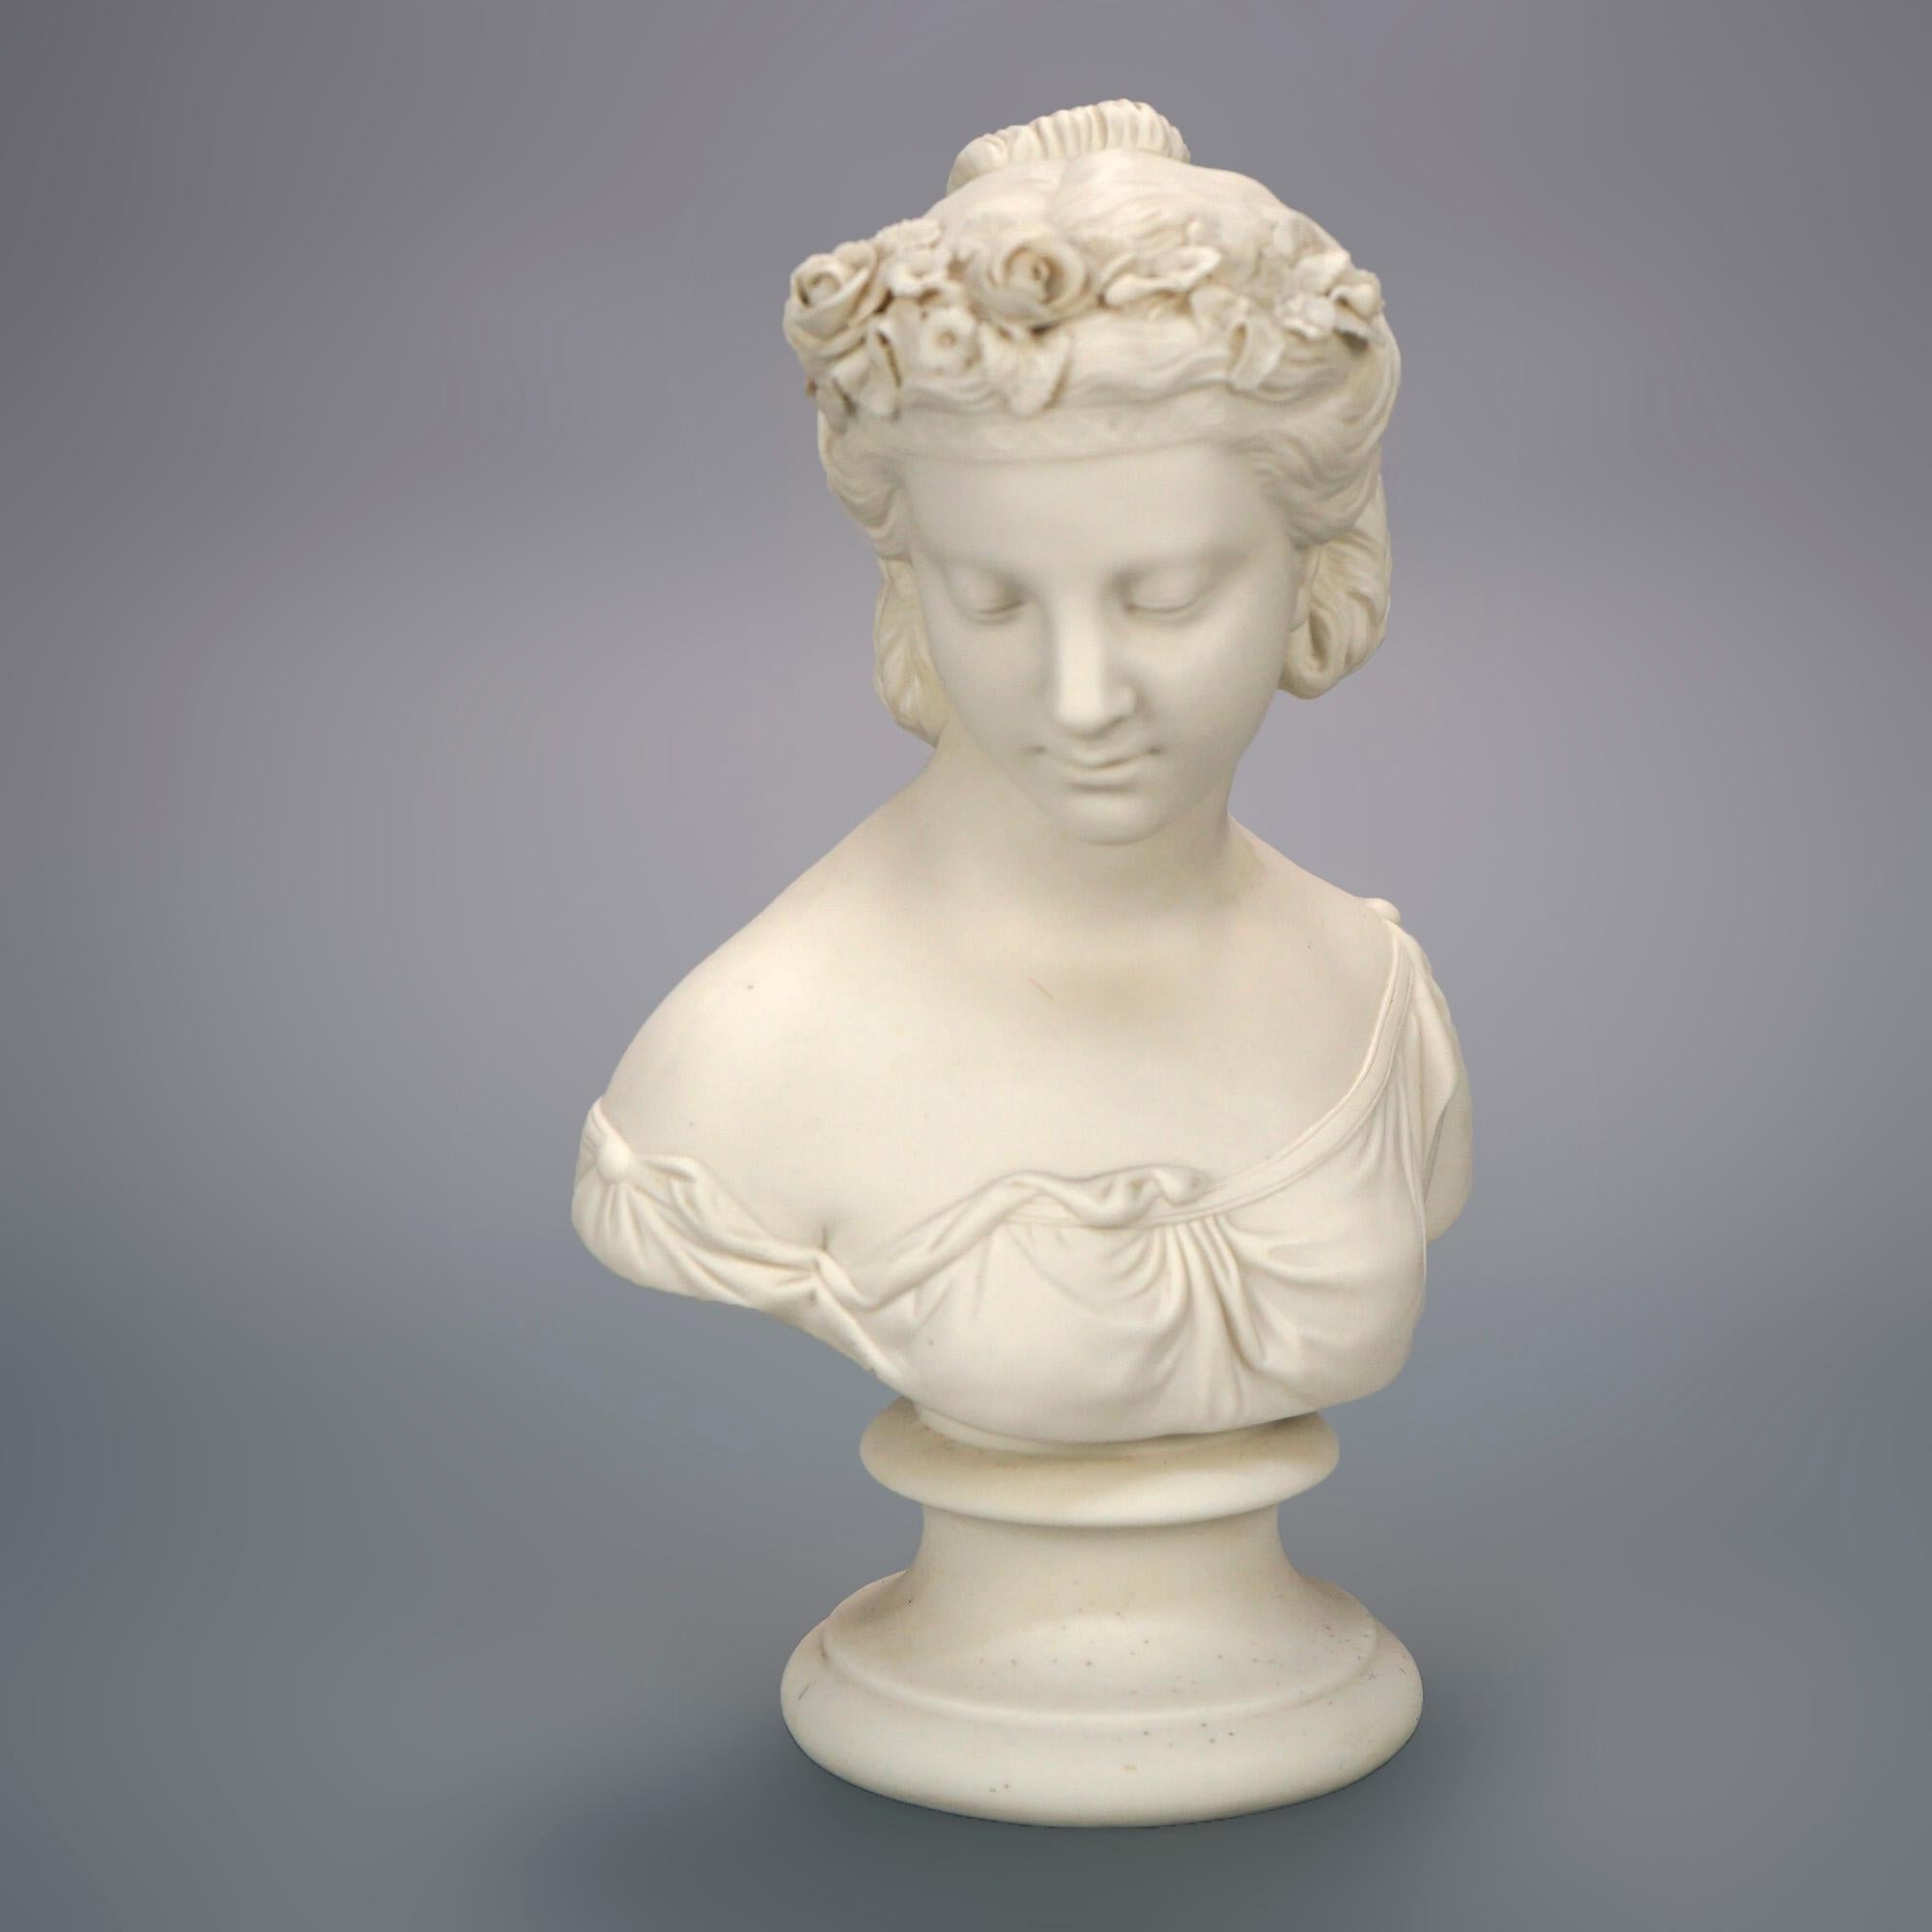 Molded Antique Parian Sculpture Bust of a Classical Young Woman 19th C